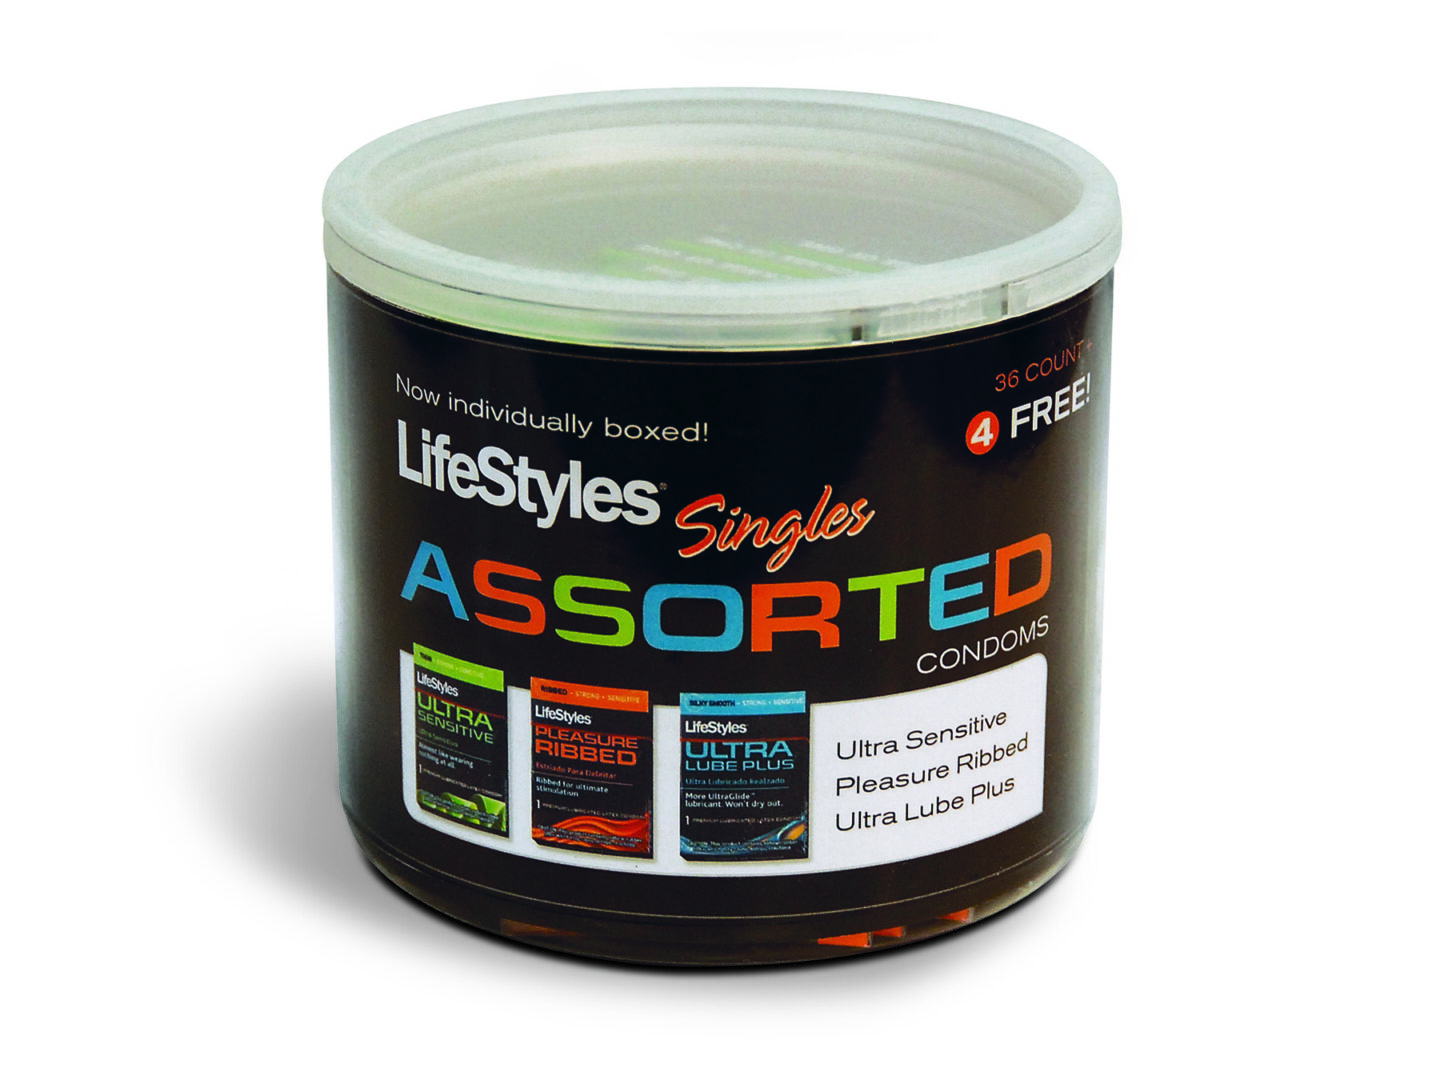 Lifestyles Assorted Singles